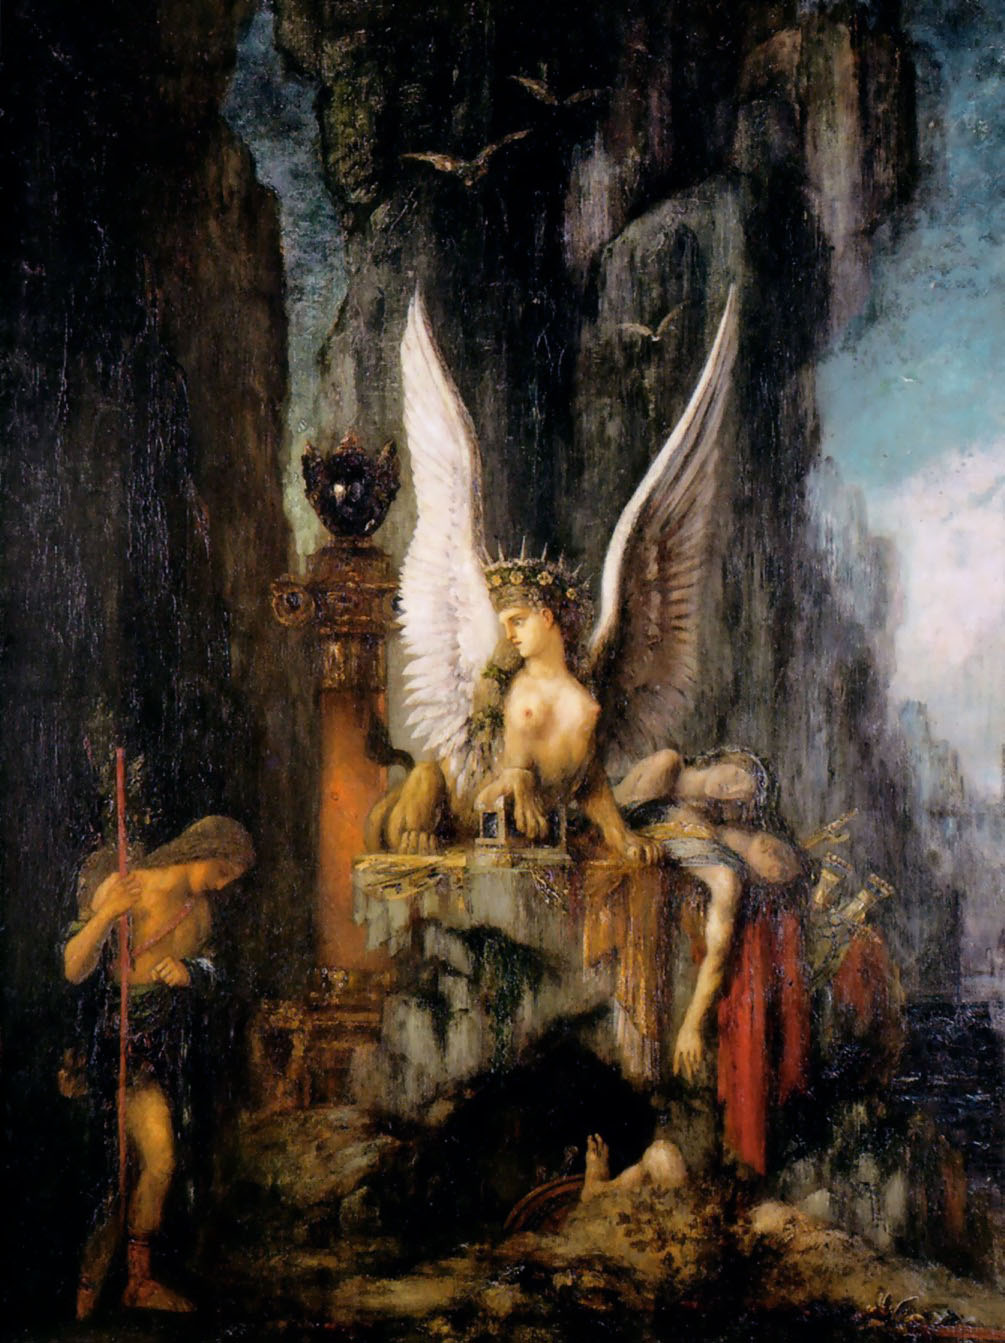 Œdipe voyageur by Gustave Moreau